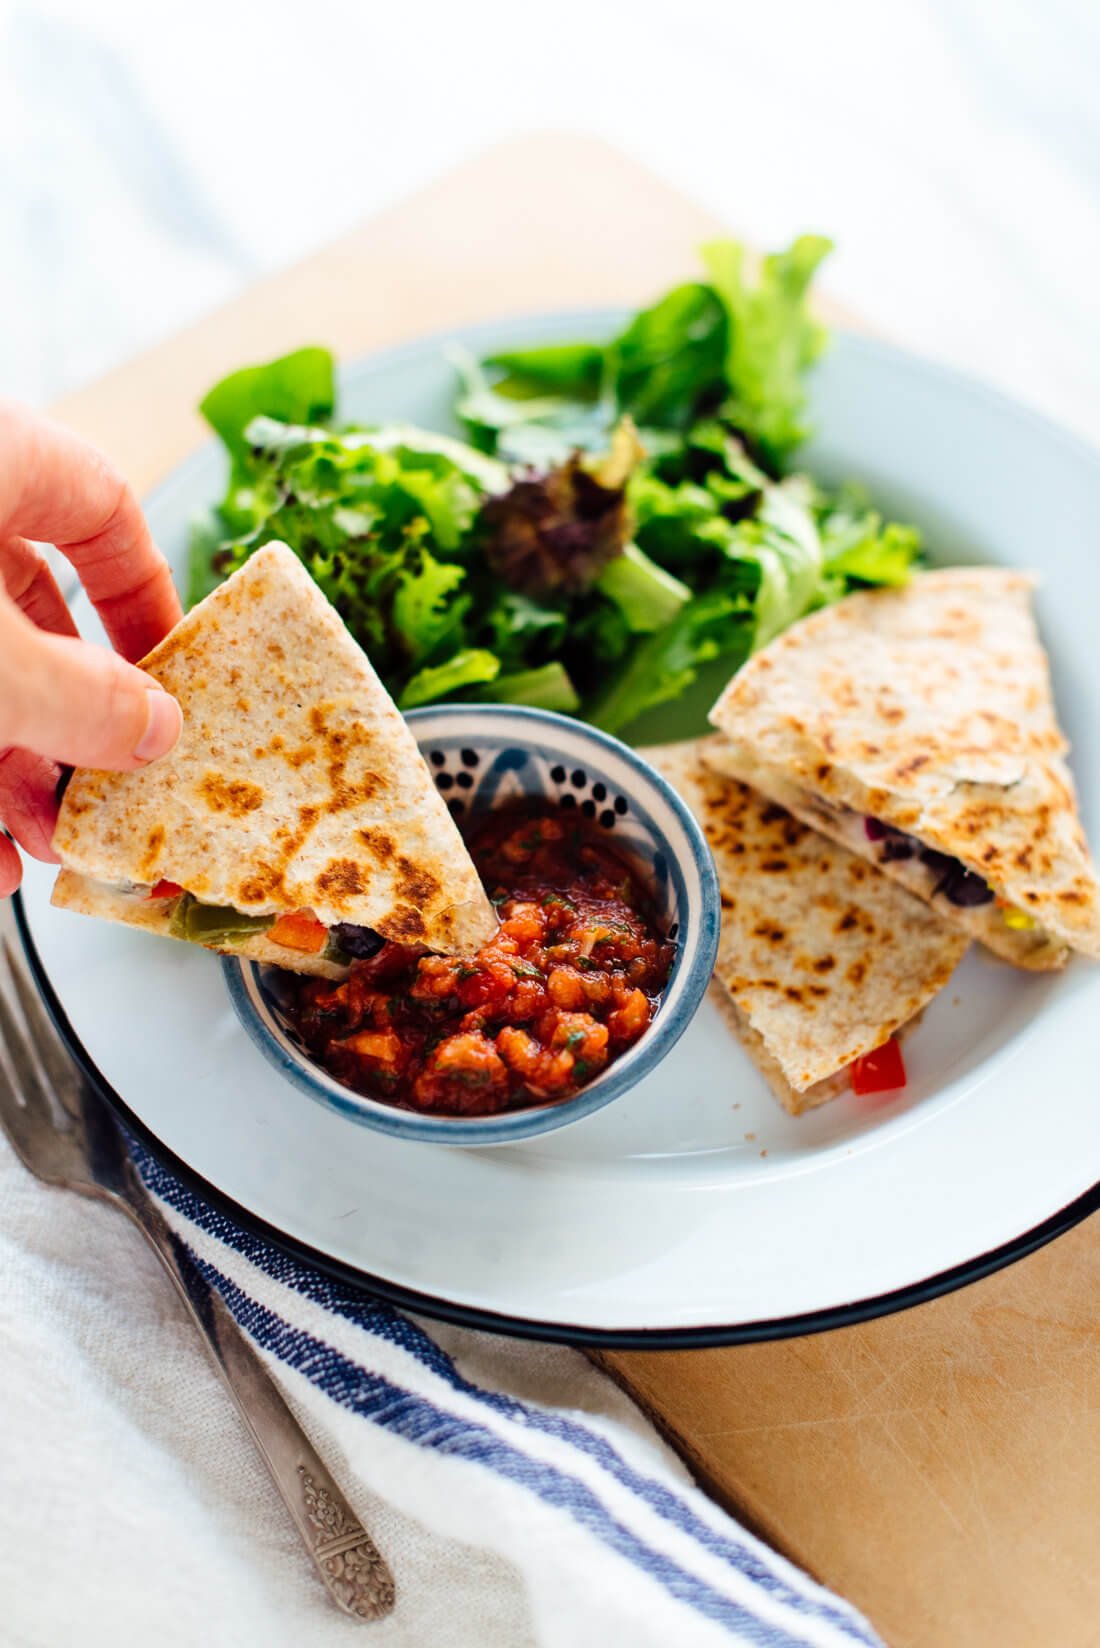 Quesadillas are the perfect quick meal. Enjoy this vegetarian quesadilla in under 10 minutes! Get the recipe at cookieandkate.com